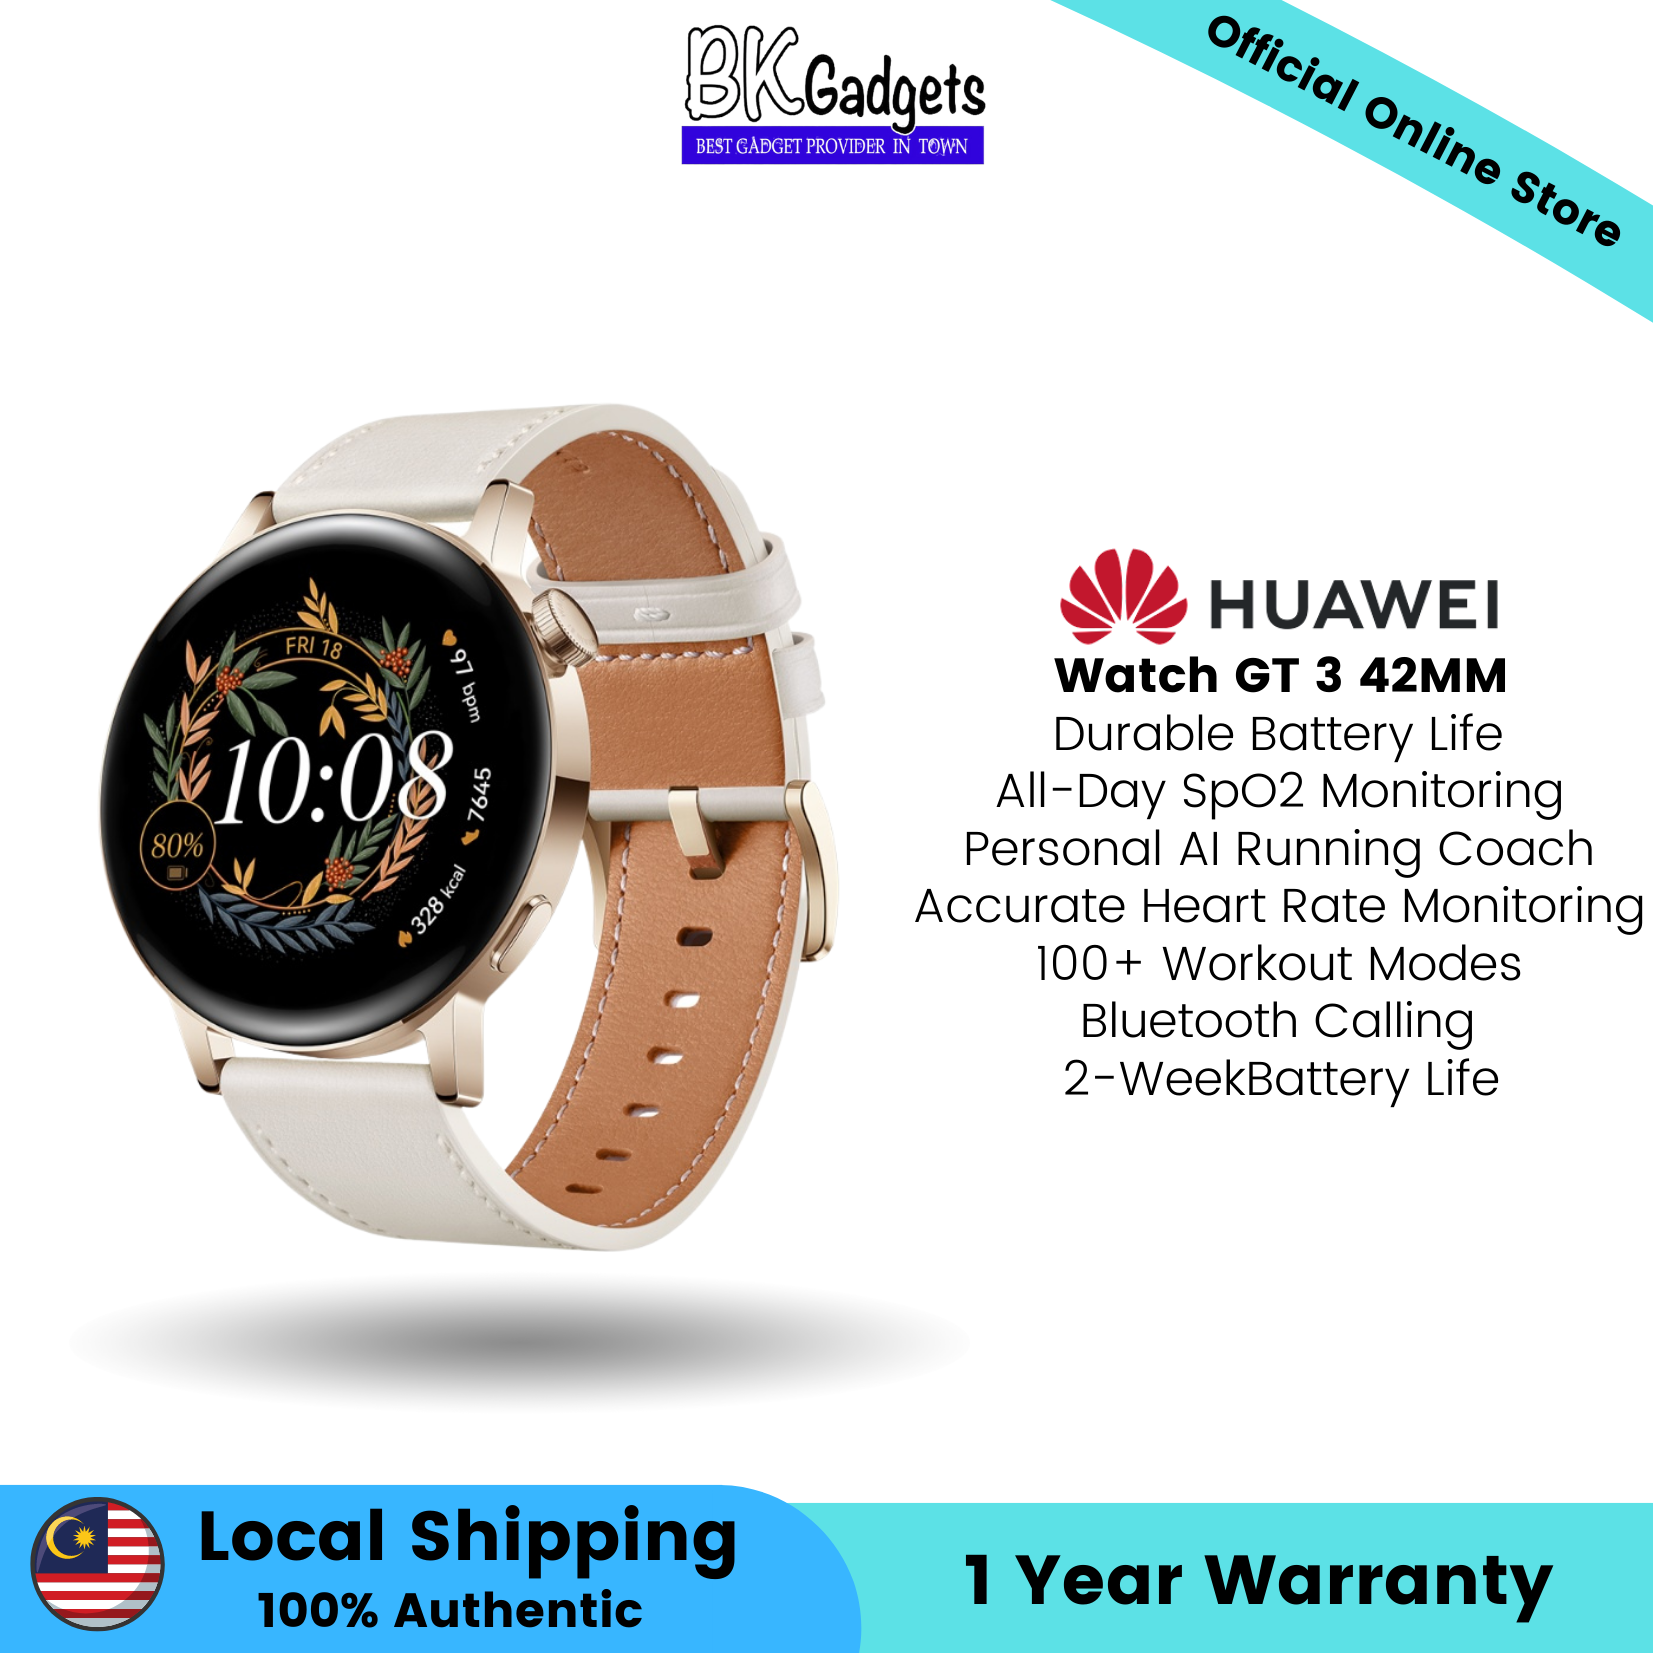 Huawei Watch GT 3 42MM White - All day SpO2 Monitoring | 100+ Workout Modes | Bluetooth Calling